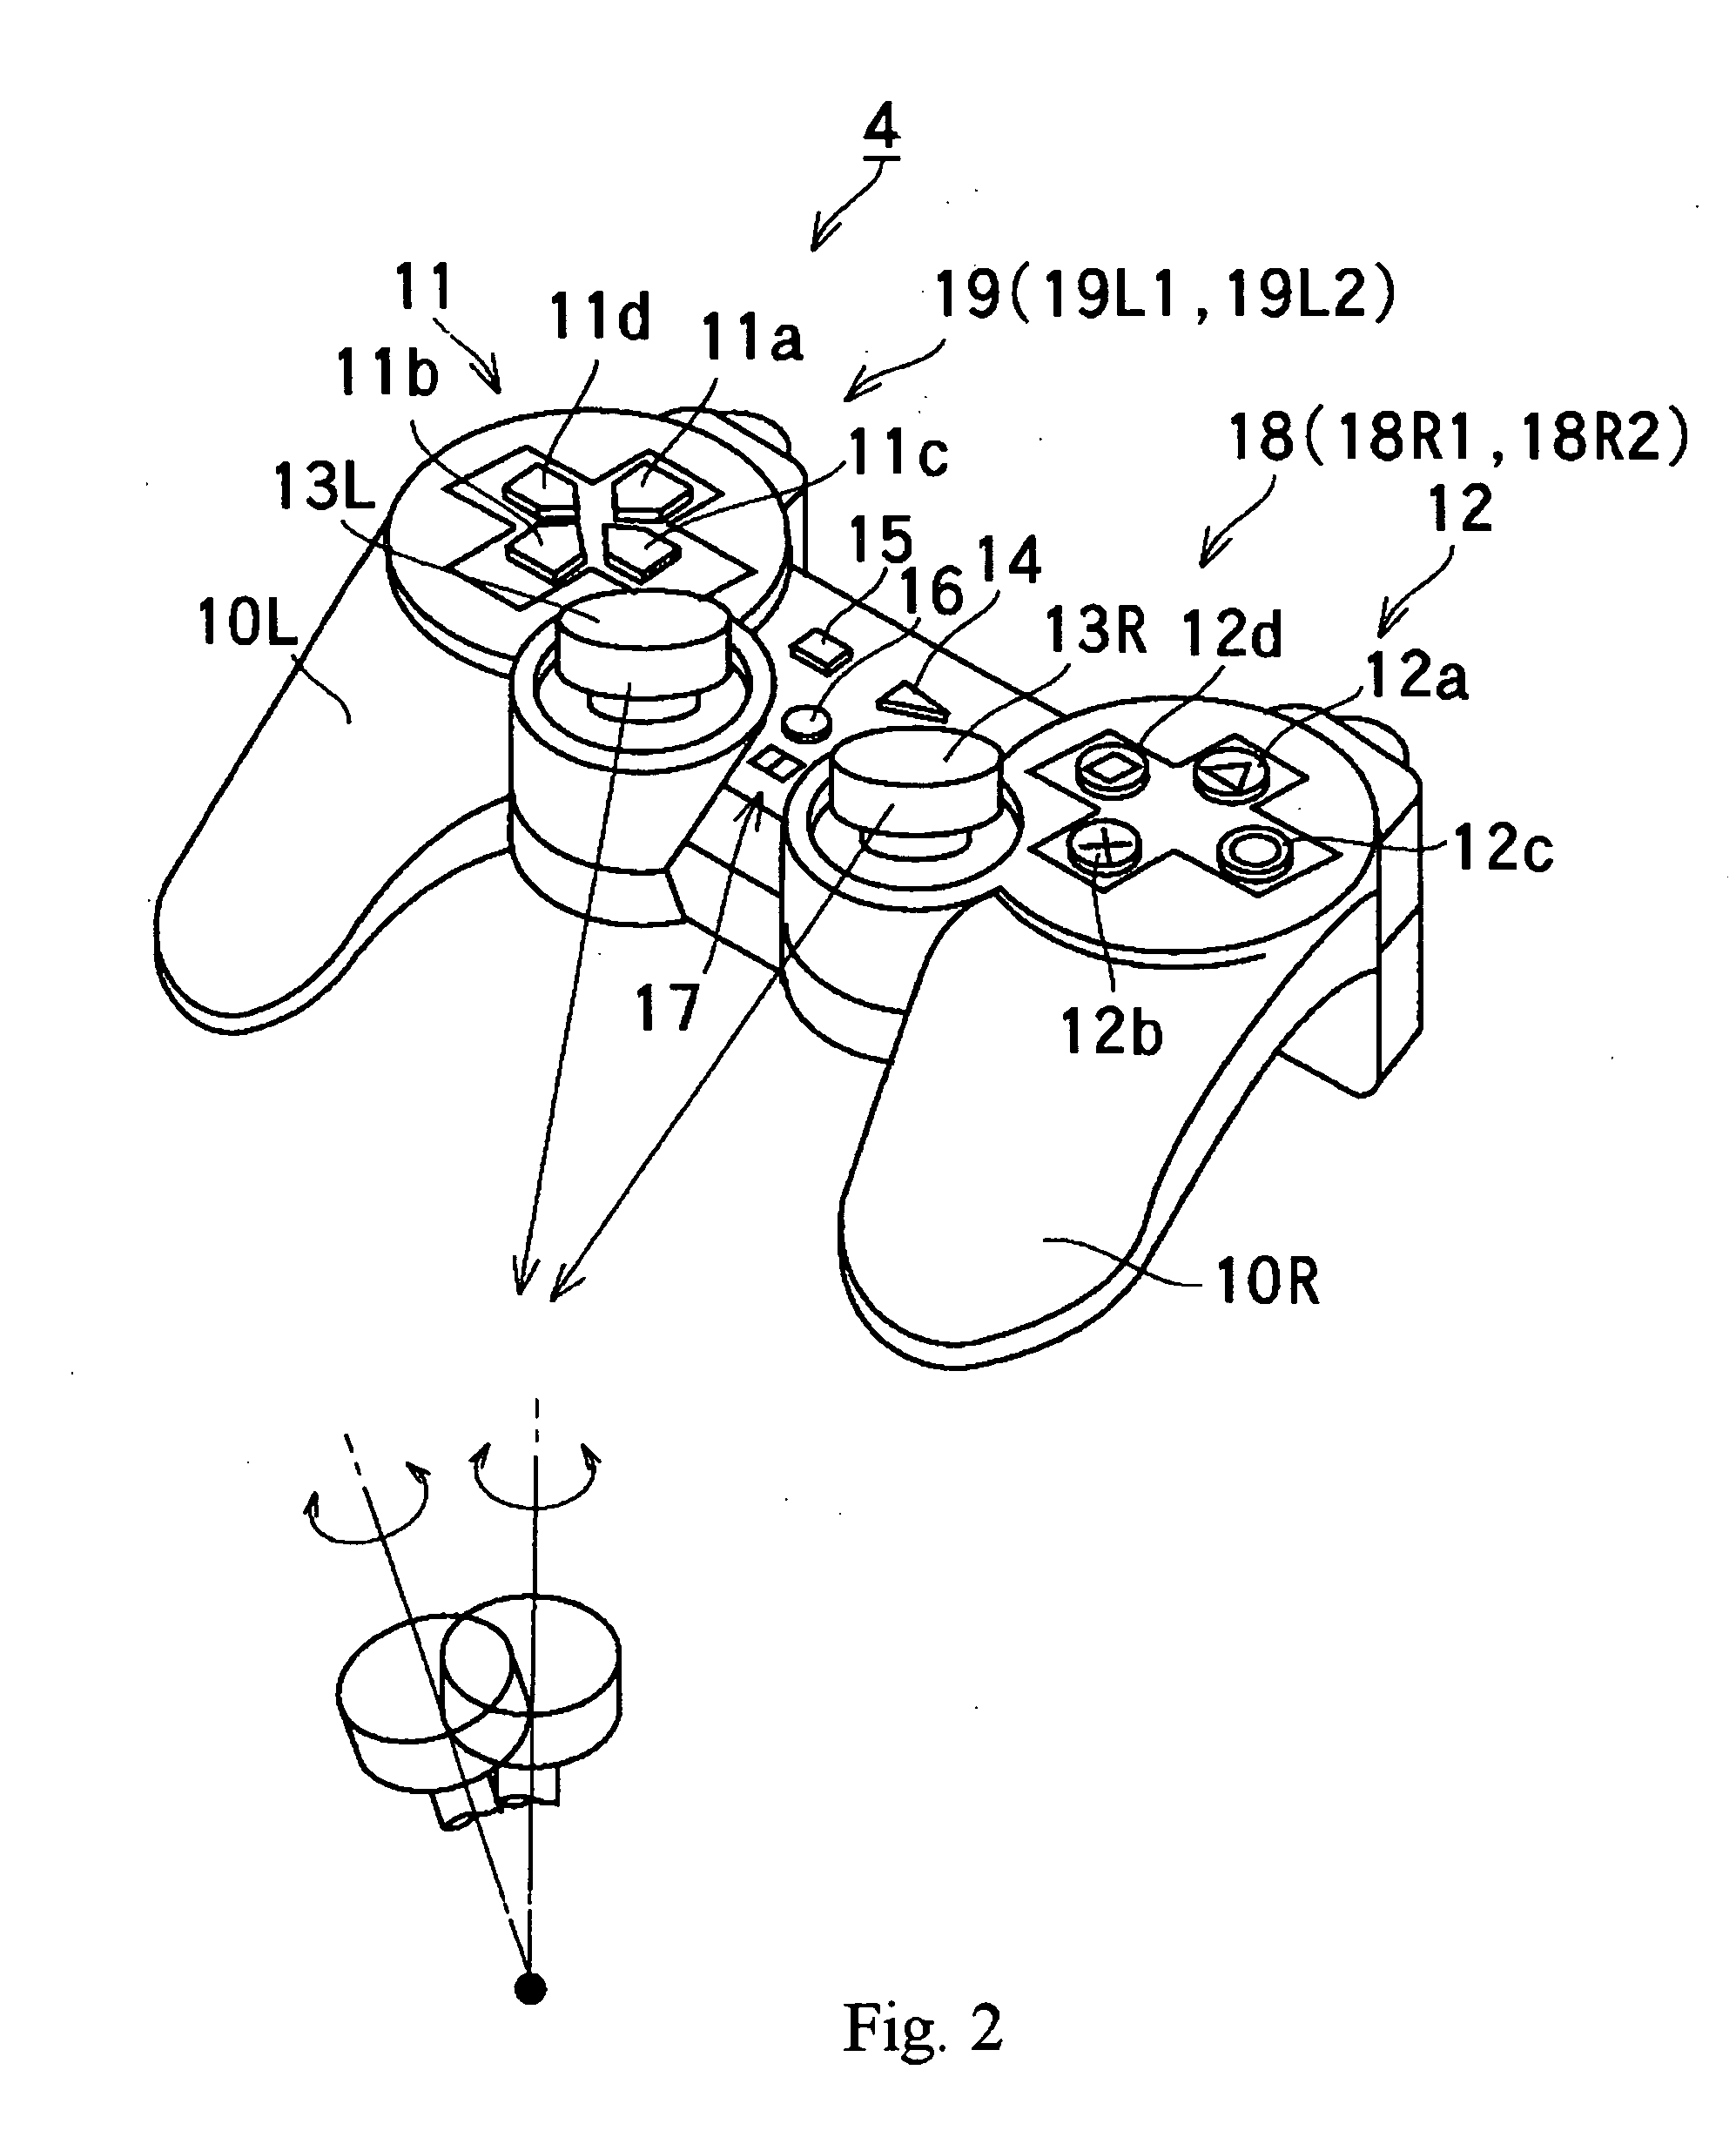 Object display system in a virtual world